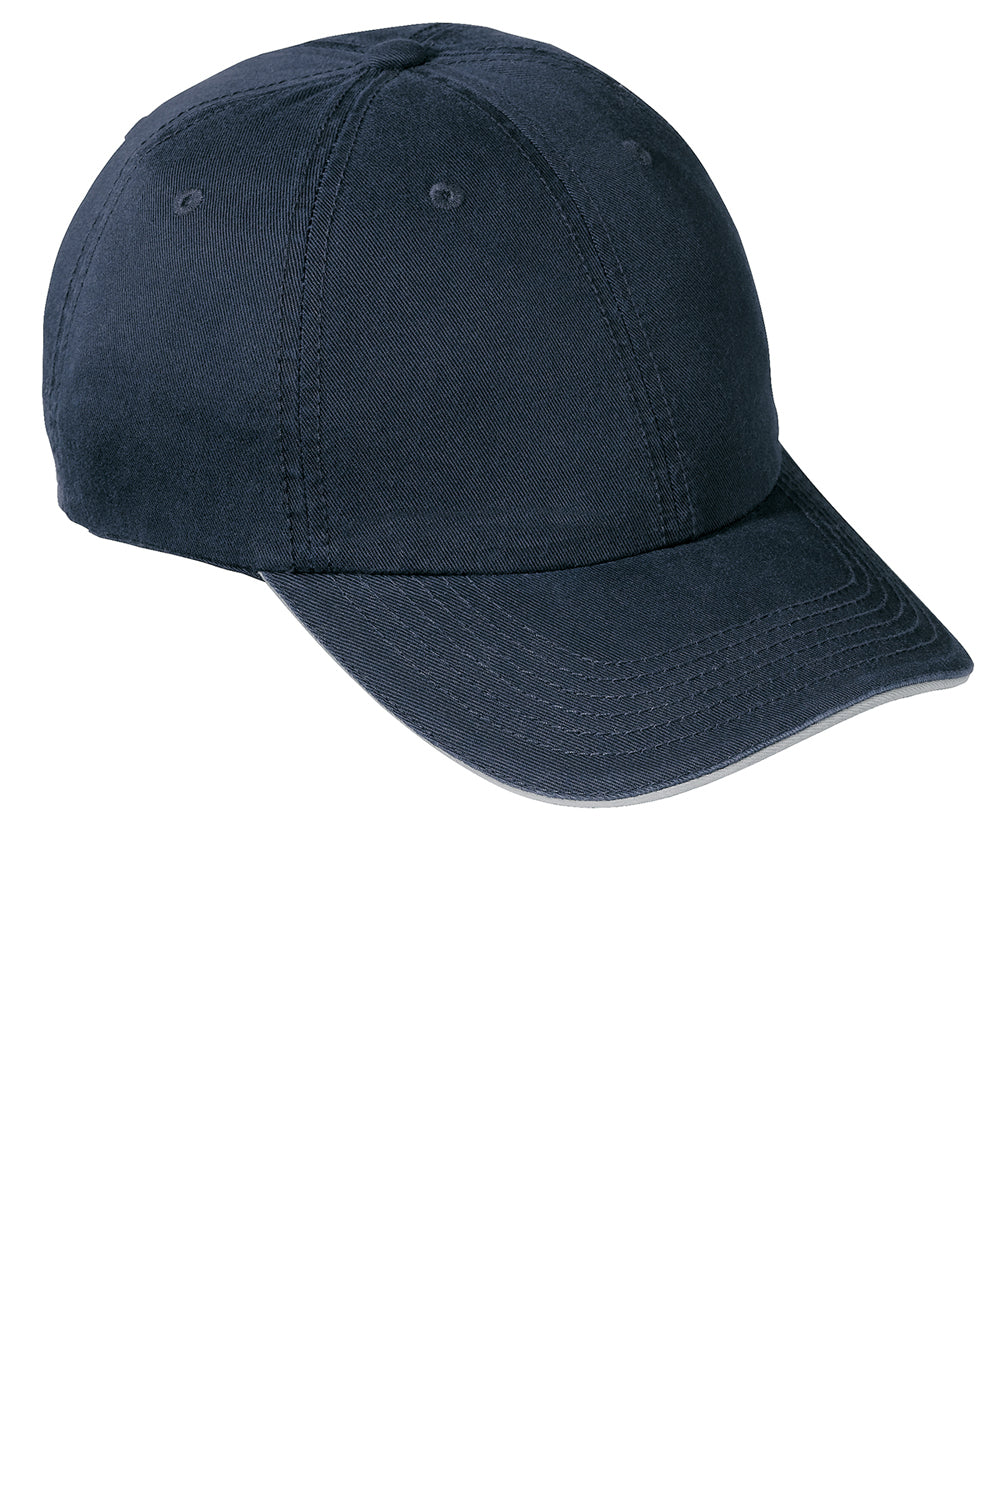 Port & Company CP79 Mens Adjustable Hat Navy Blue Front